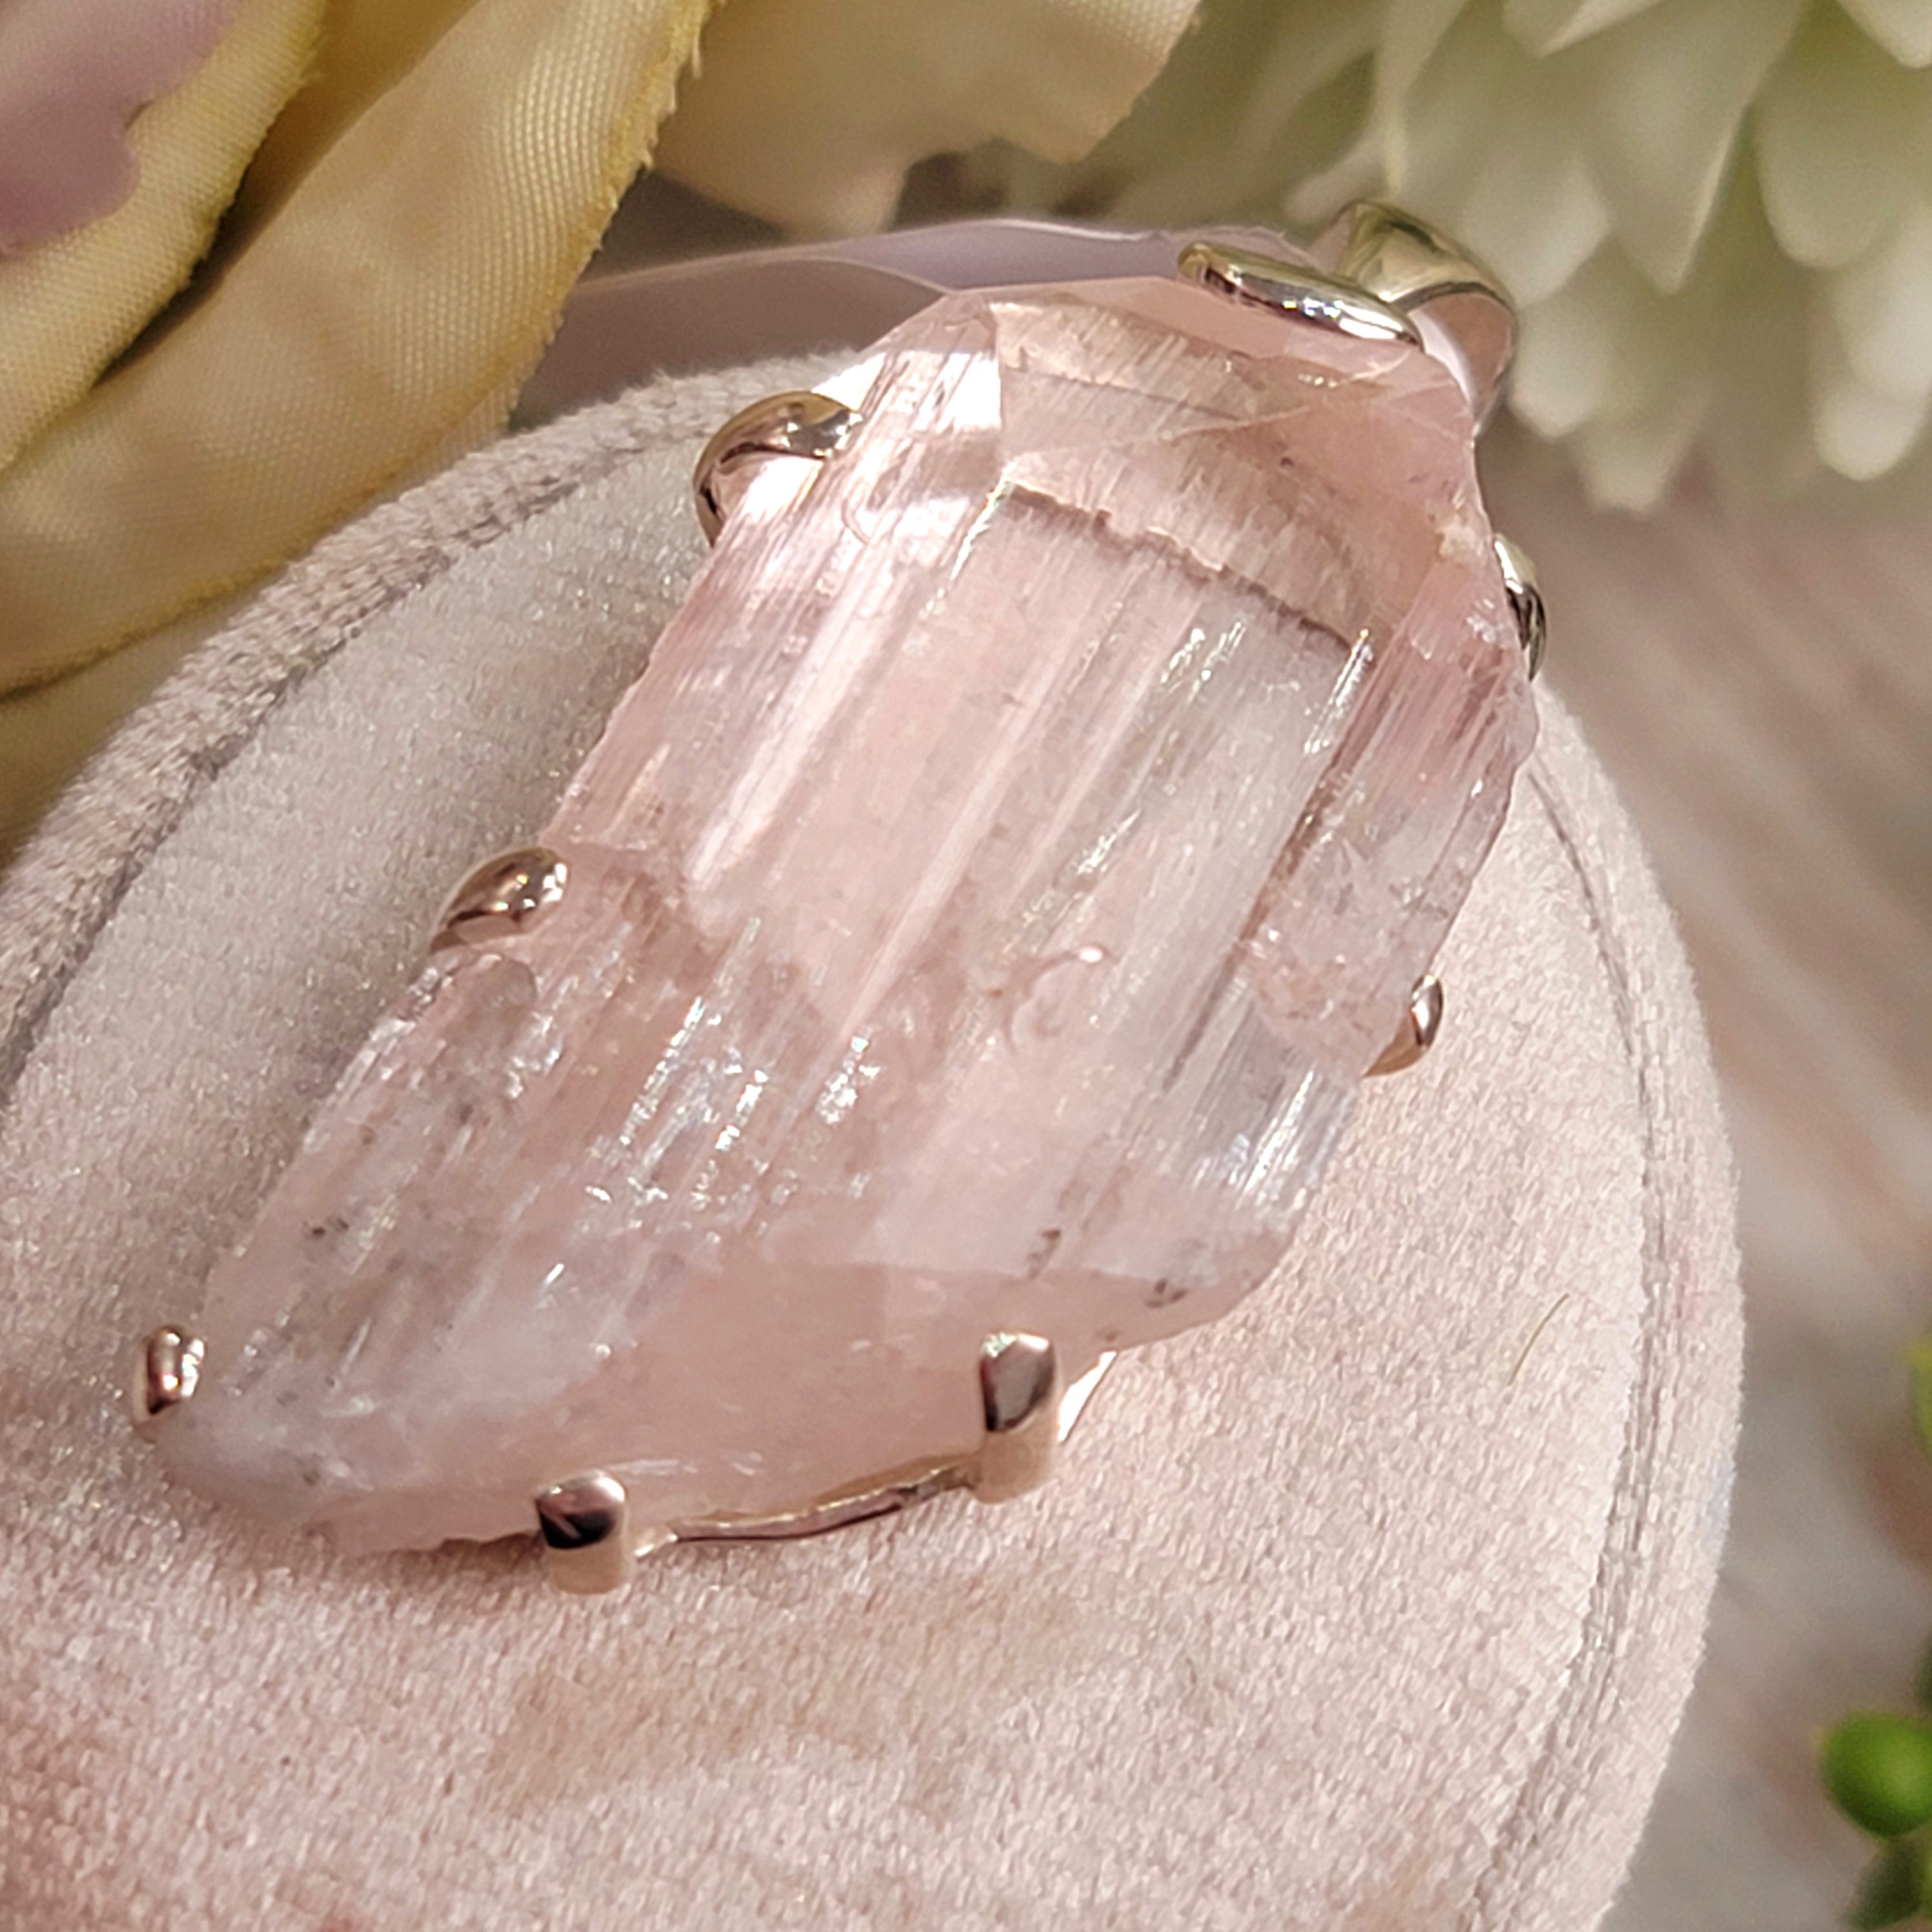 Danburite Pendant for Connection with Higher Realms, Peace and Self Acceptance